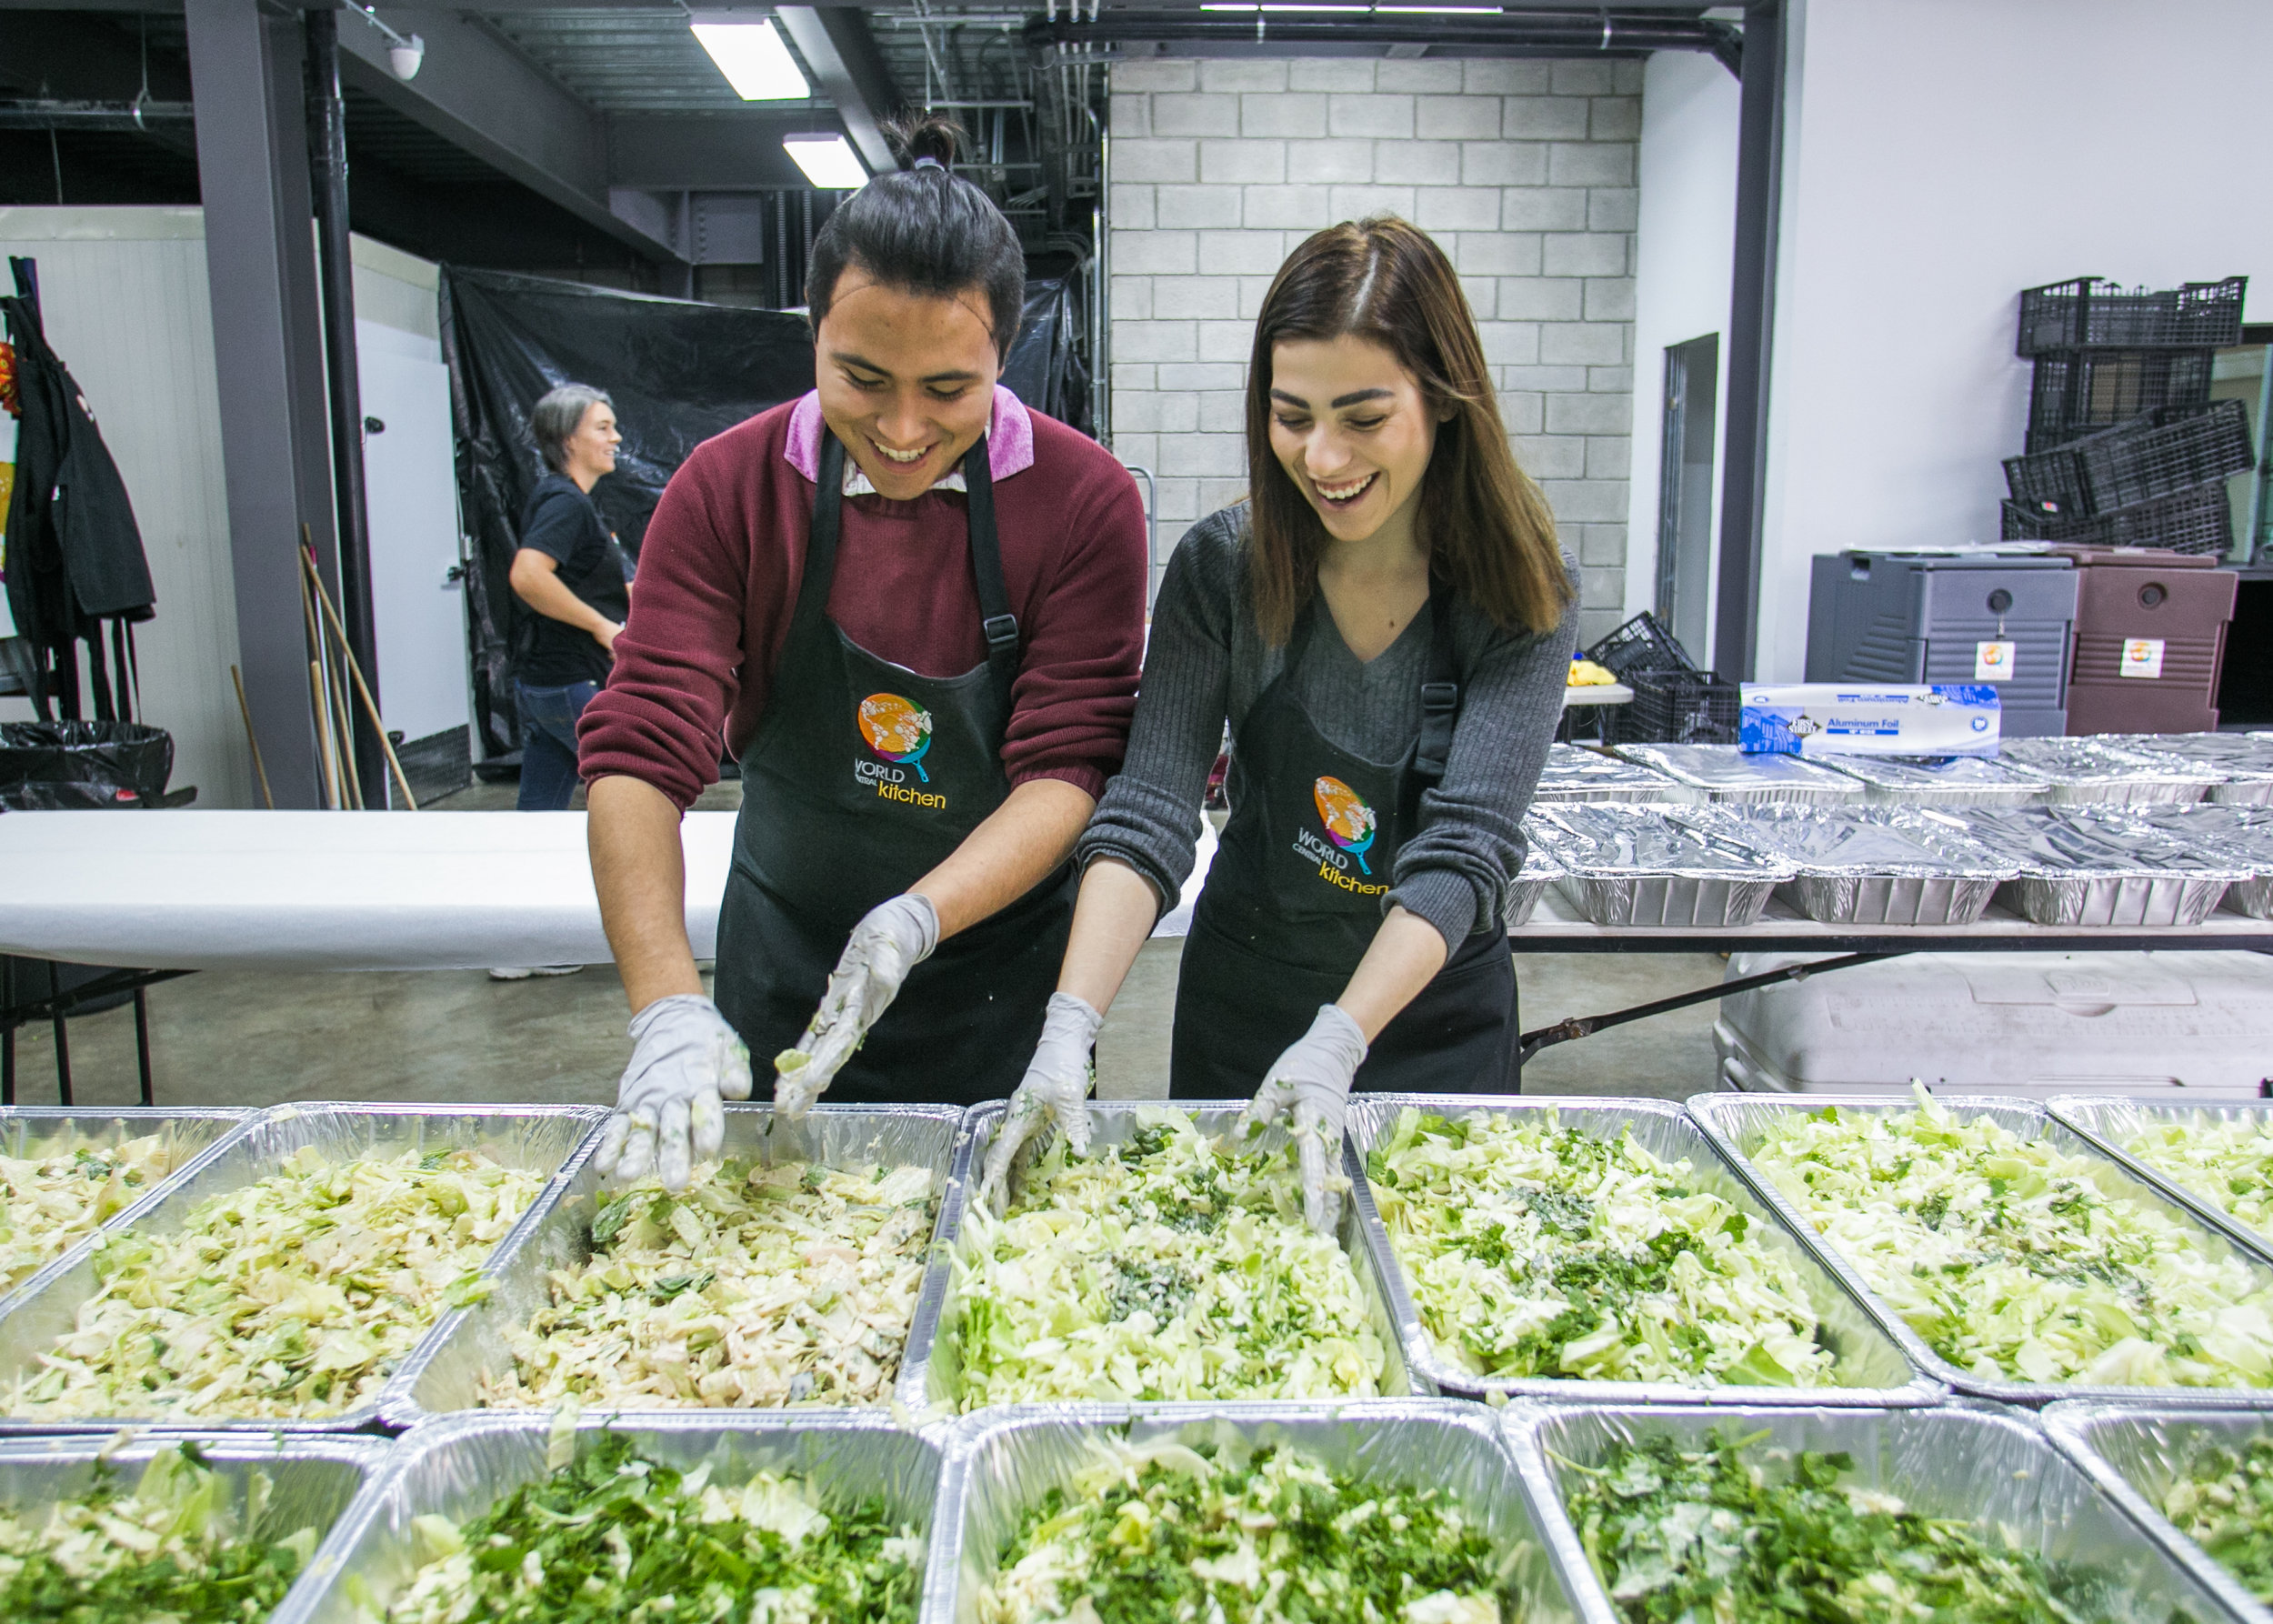  Oscar Montana, a volunteer from a local Tijuana university, prepares dinner at the World Central Kitchen Headquarters.  